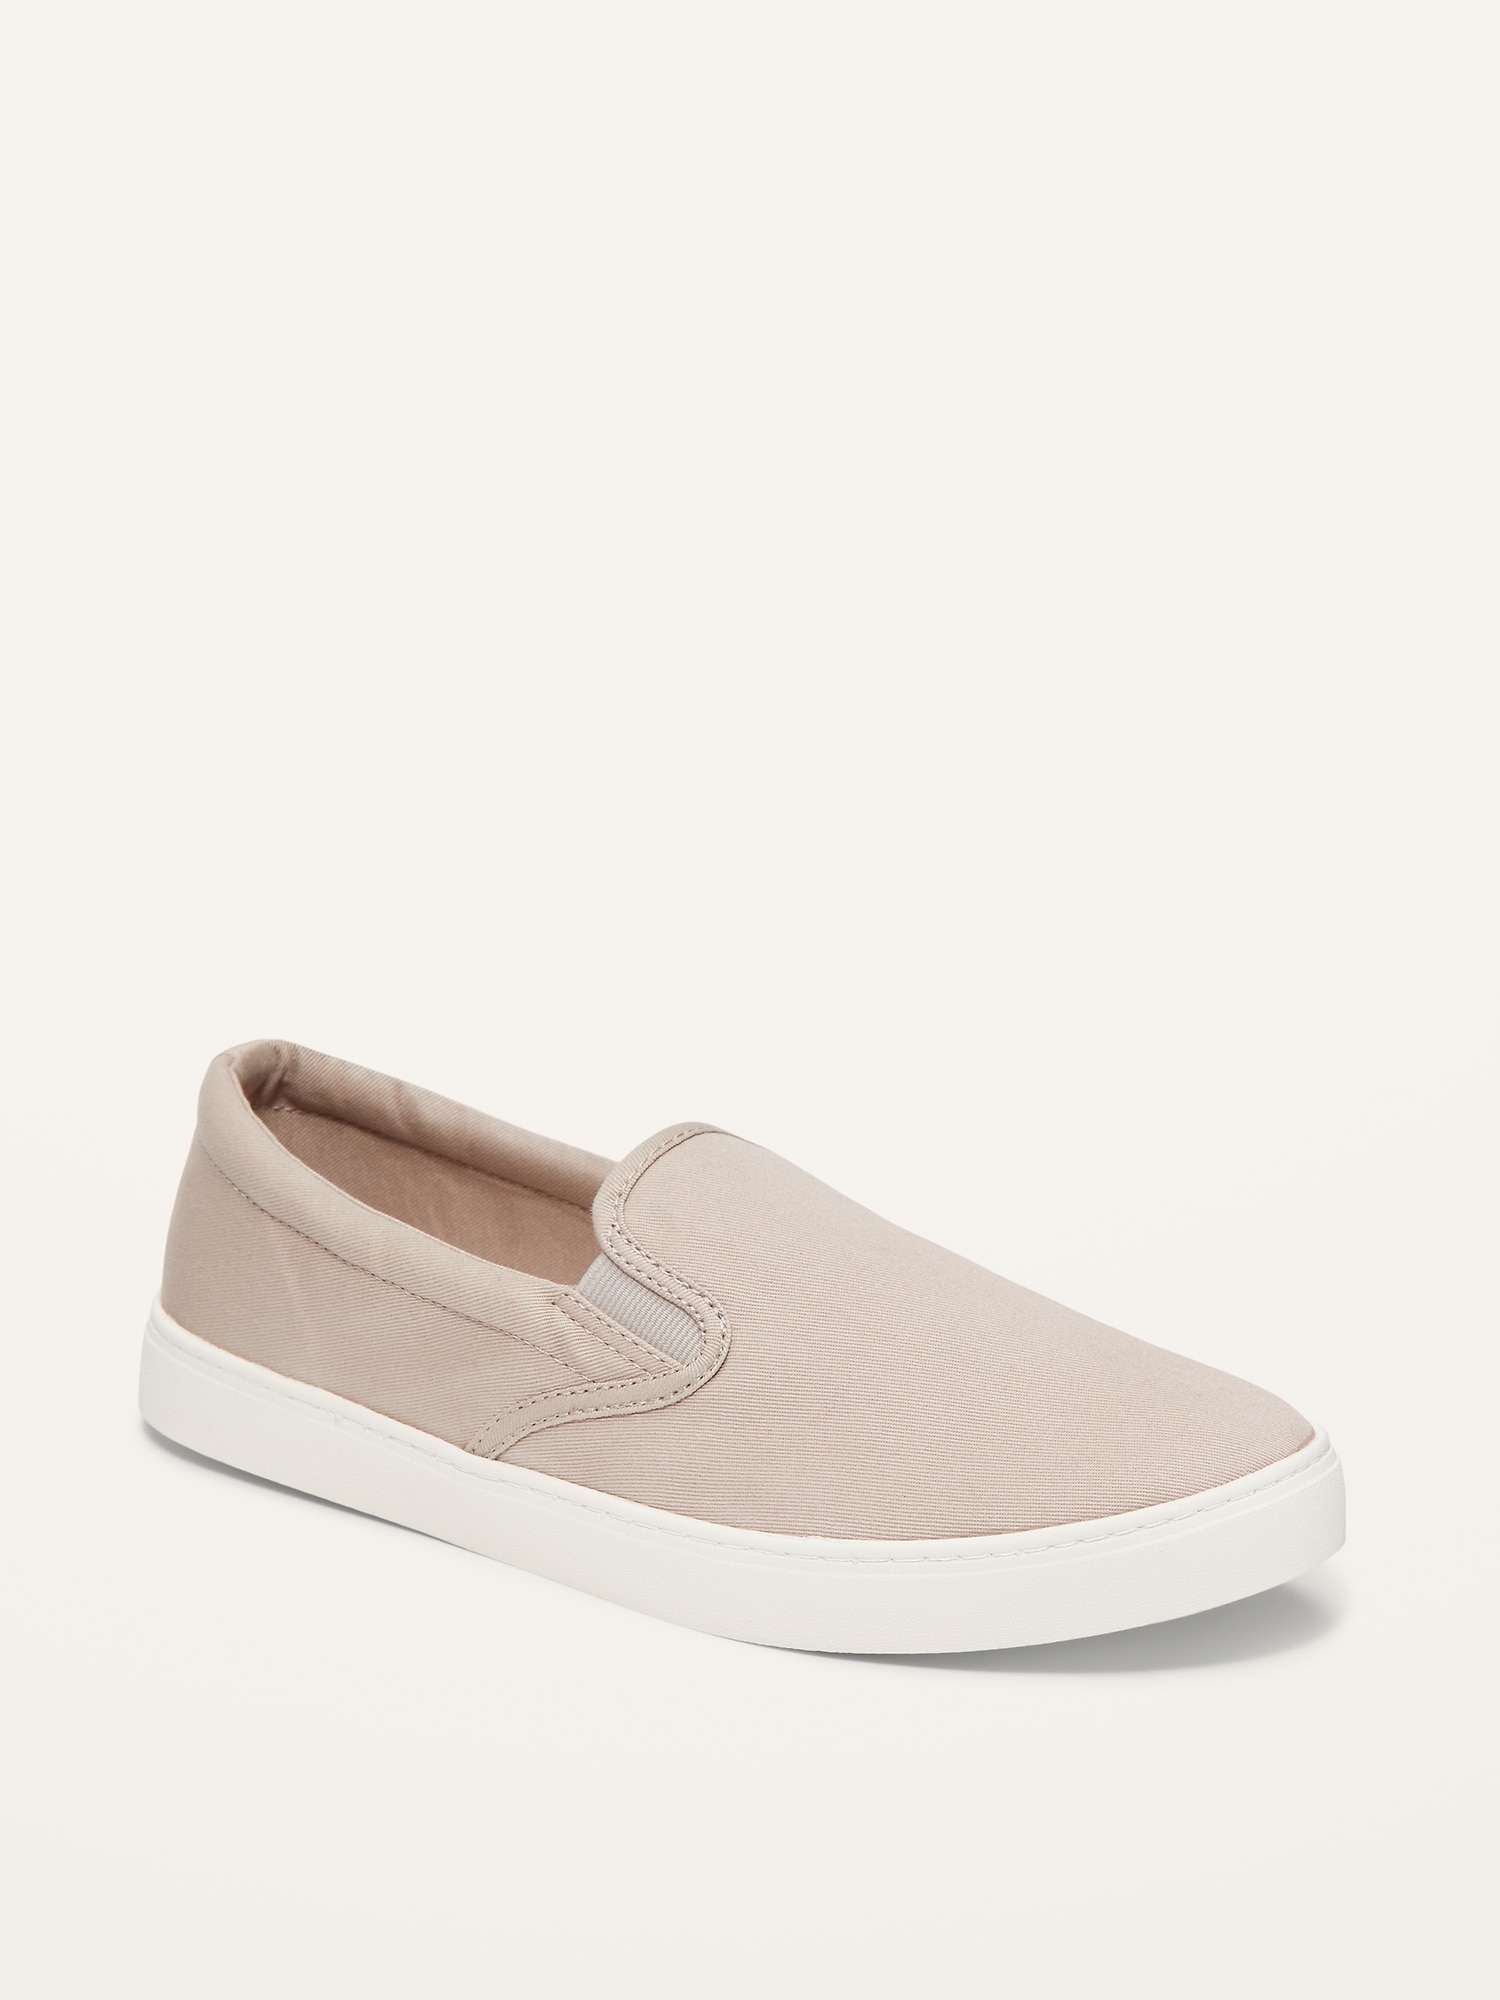 Old Navy Canvas Slip-On Sneakers For Women brown. 1